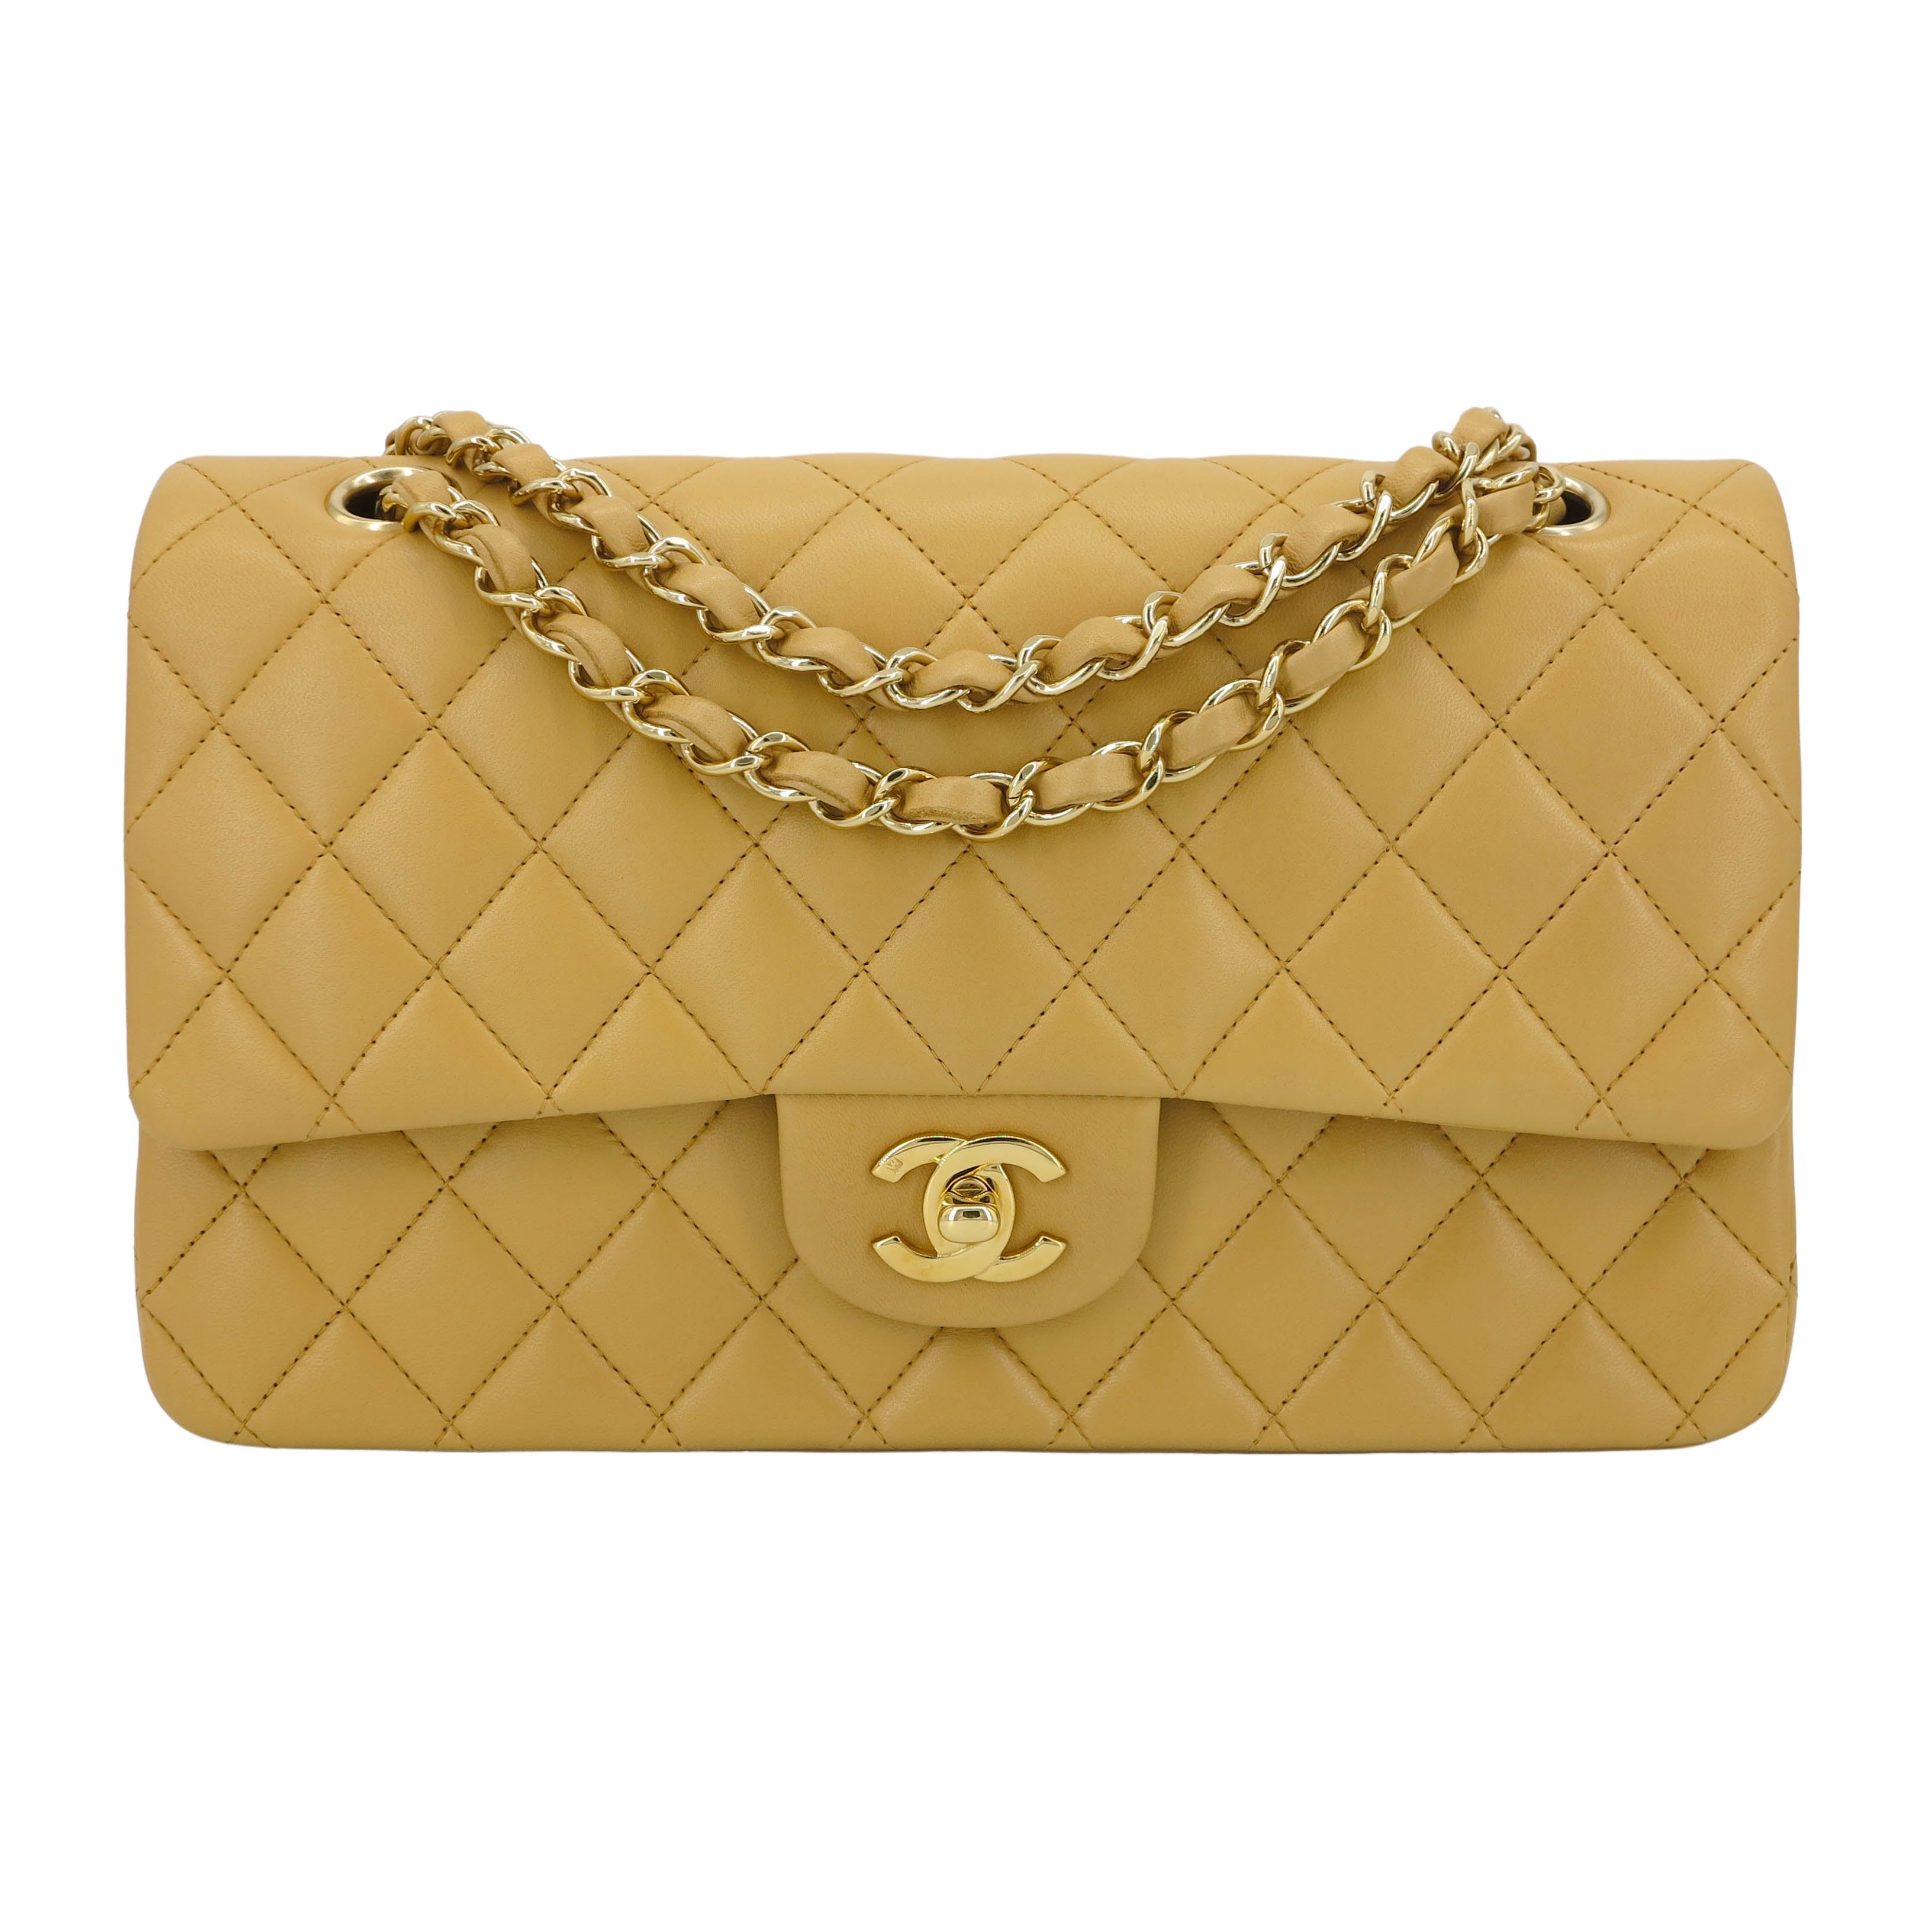 Chanel Beige Quilted Lambskin Medium Classic Double Flap Bag, myGemma